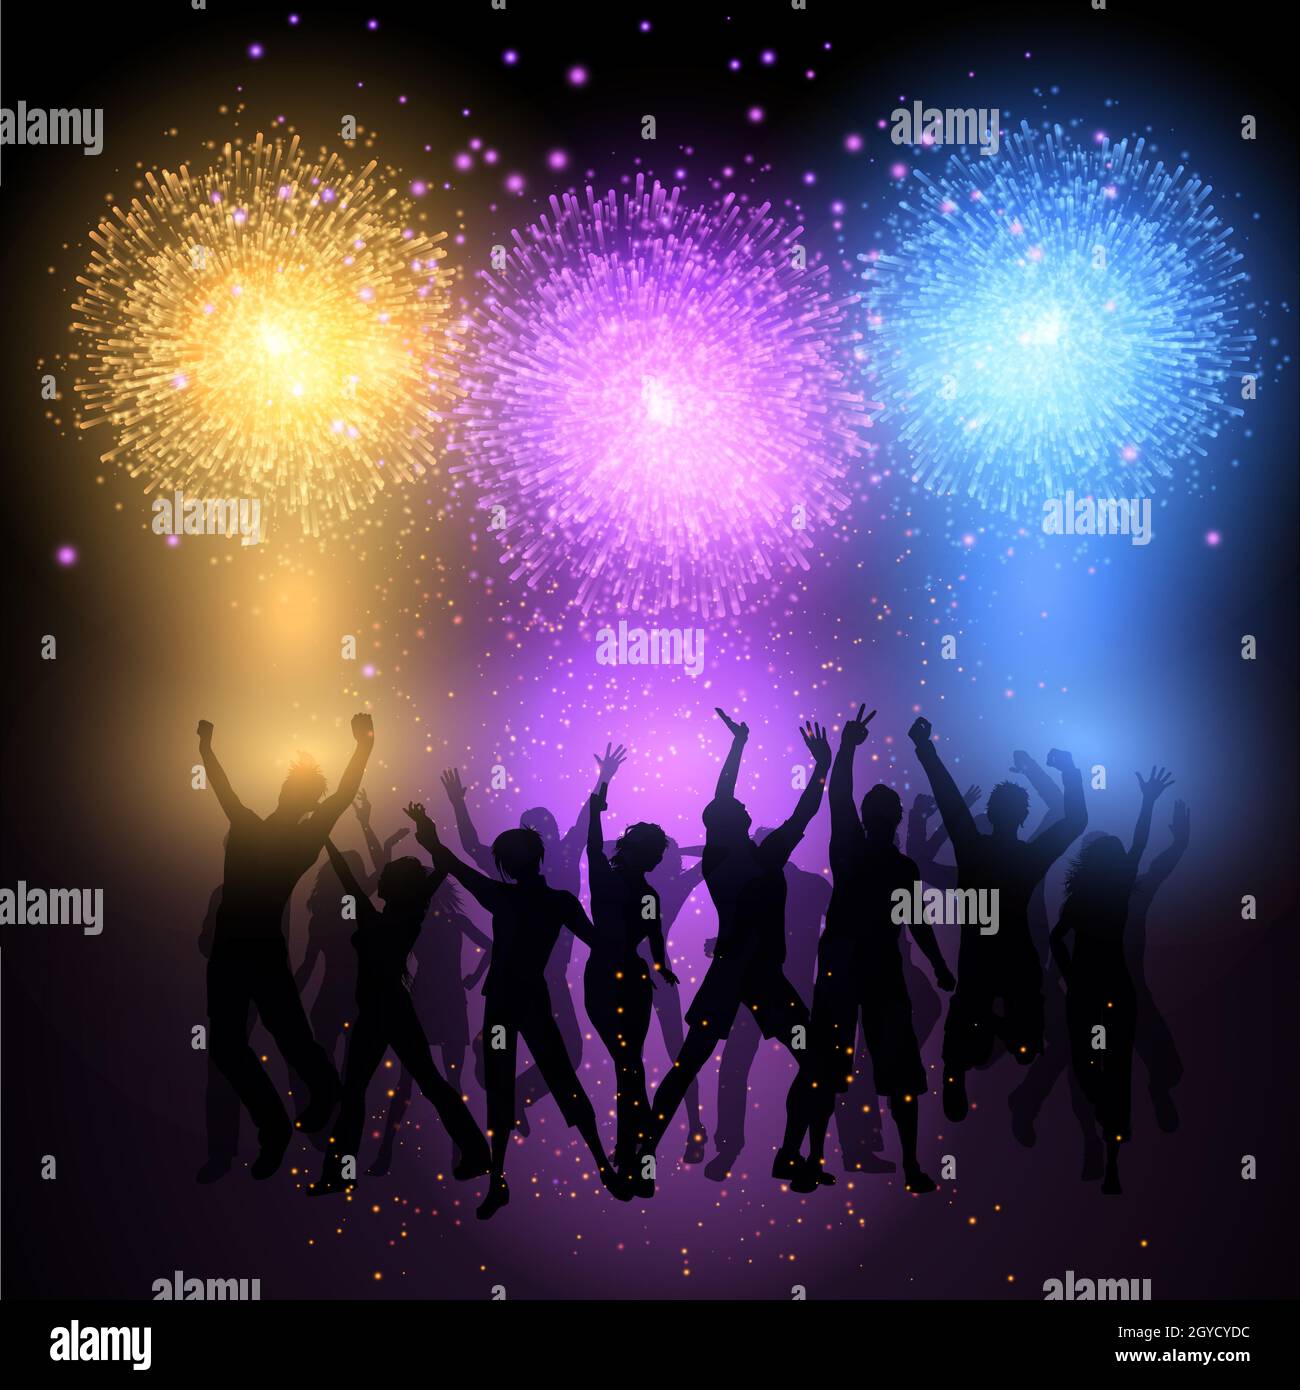 Silhouettes of people dancing on a fireworks background Stock Photo